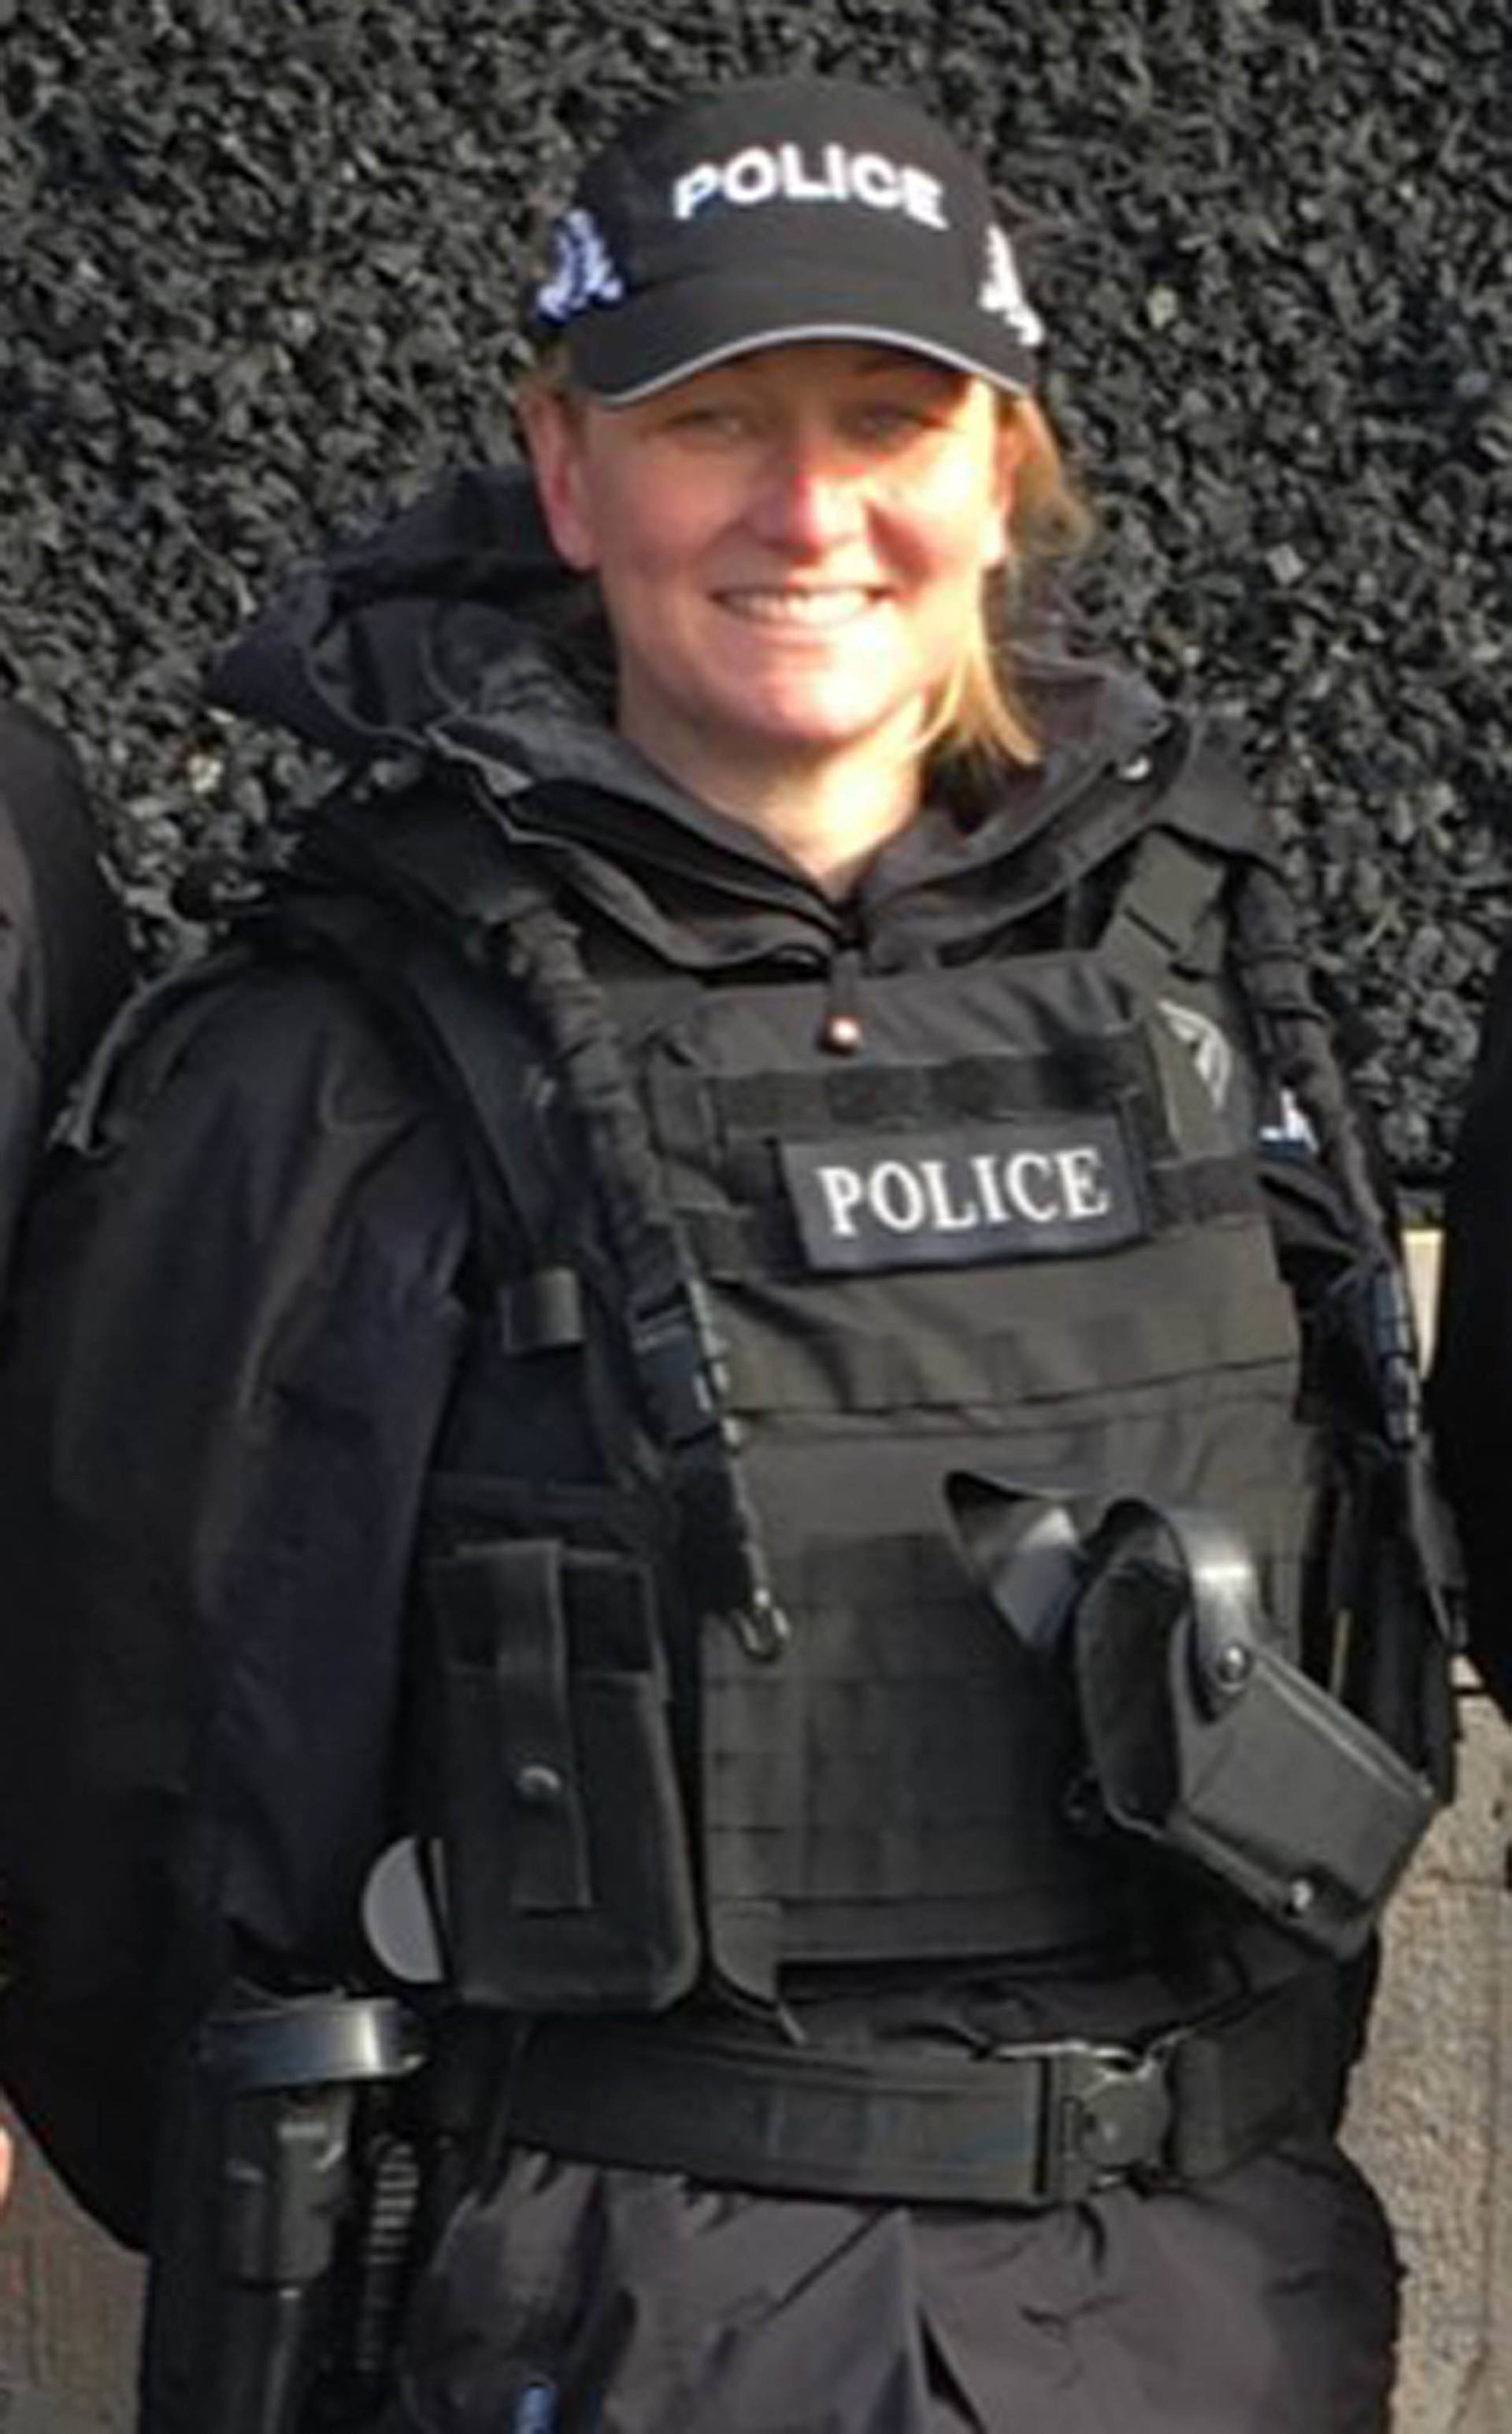 Former armed response officer Rhona Malone brought an employment tribunal against Police.